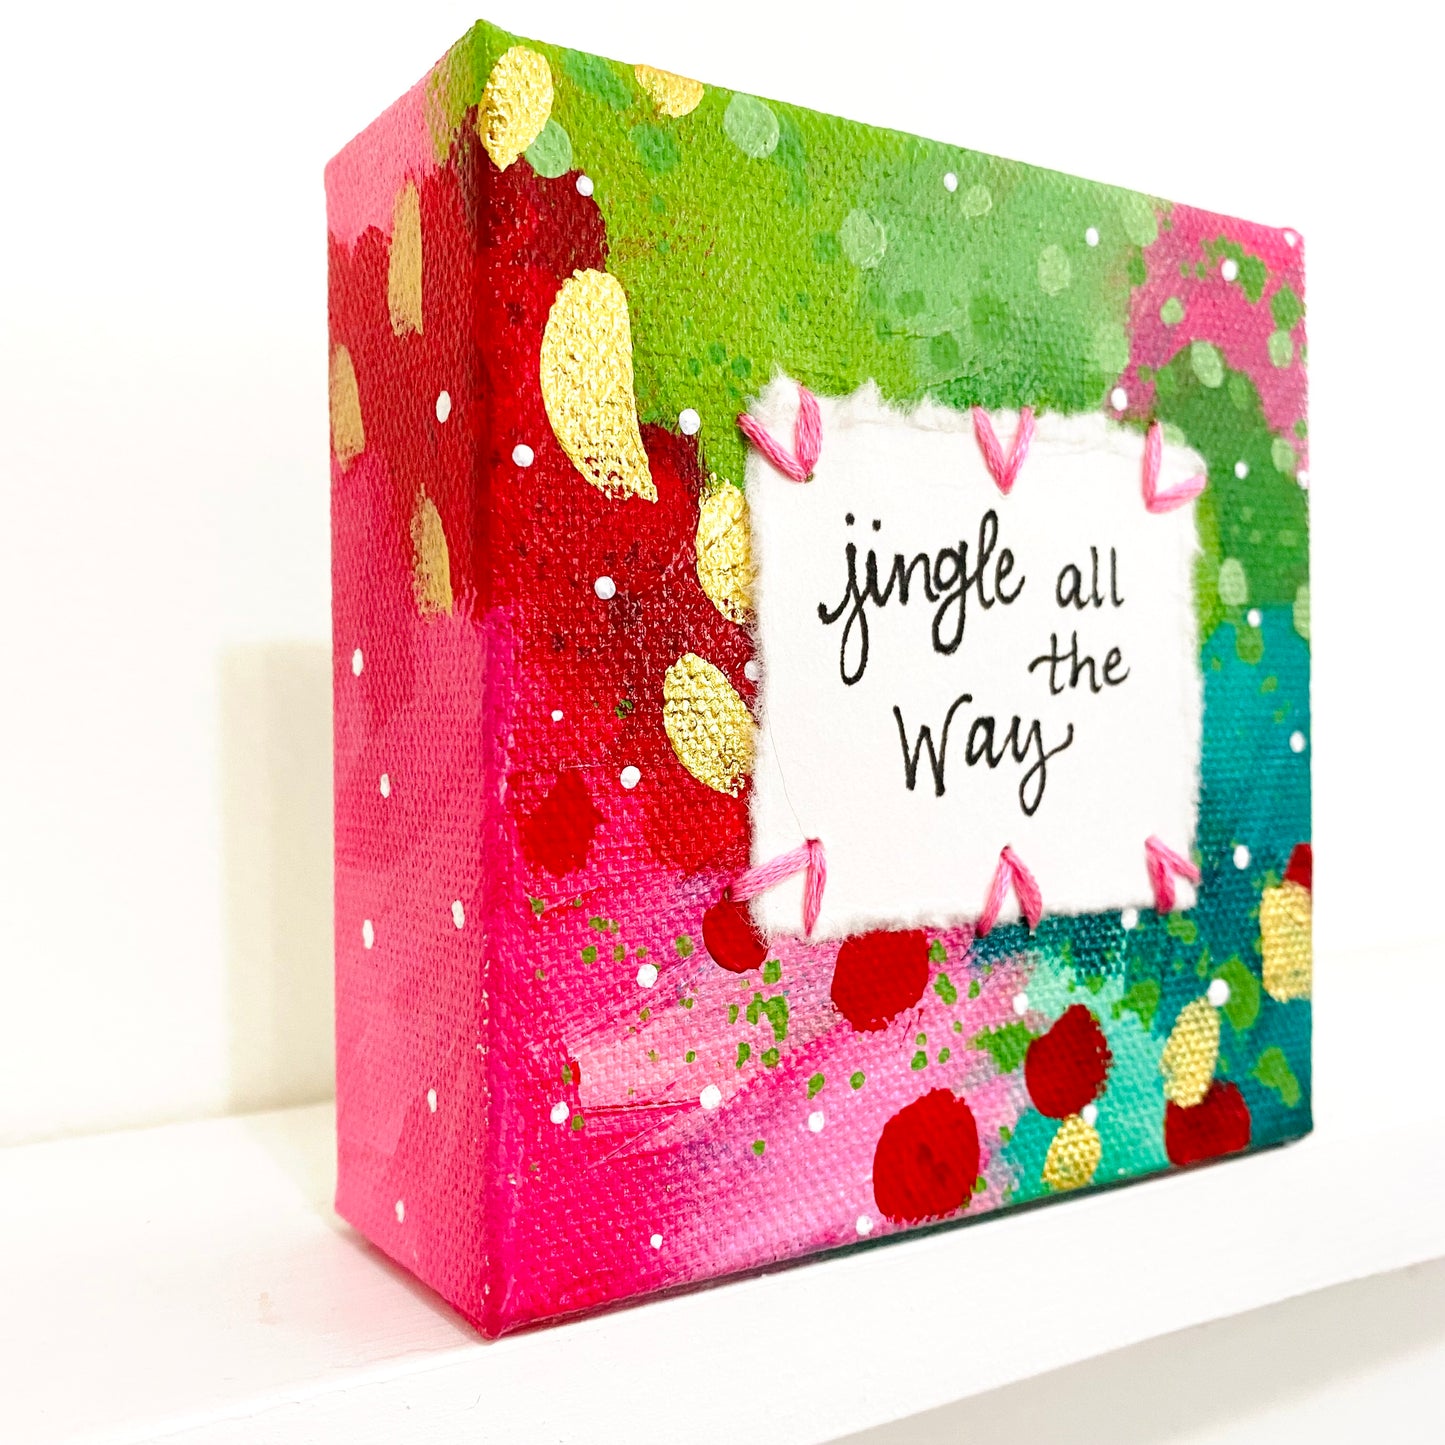 Jingle All the Way 4x4 inch original abstract canvas with embroidery thread accents